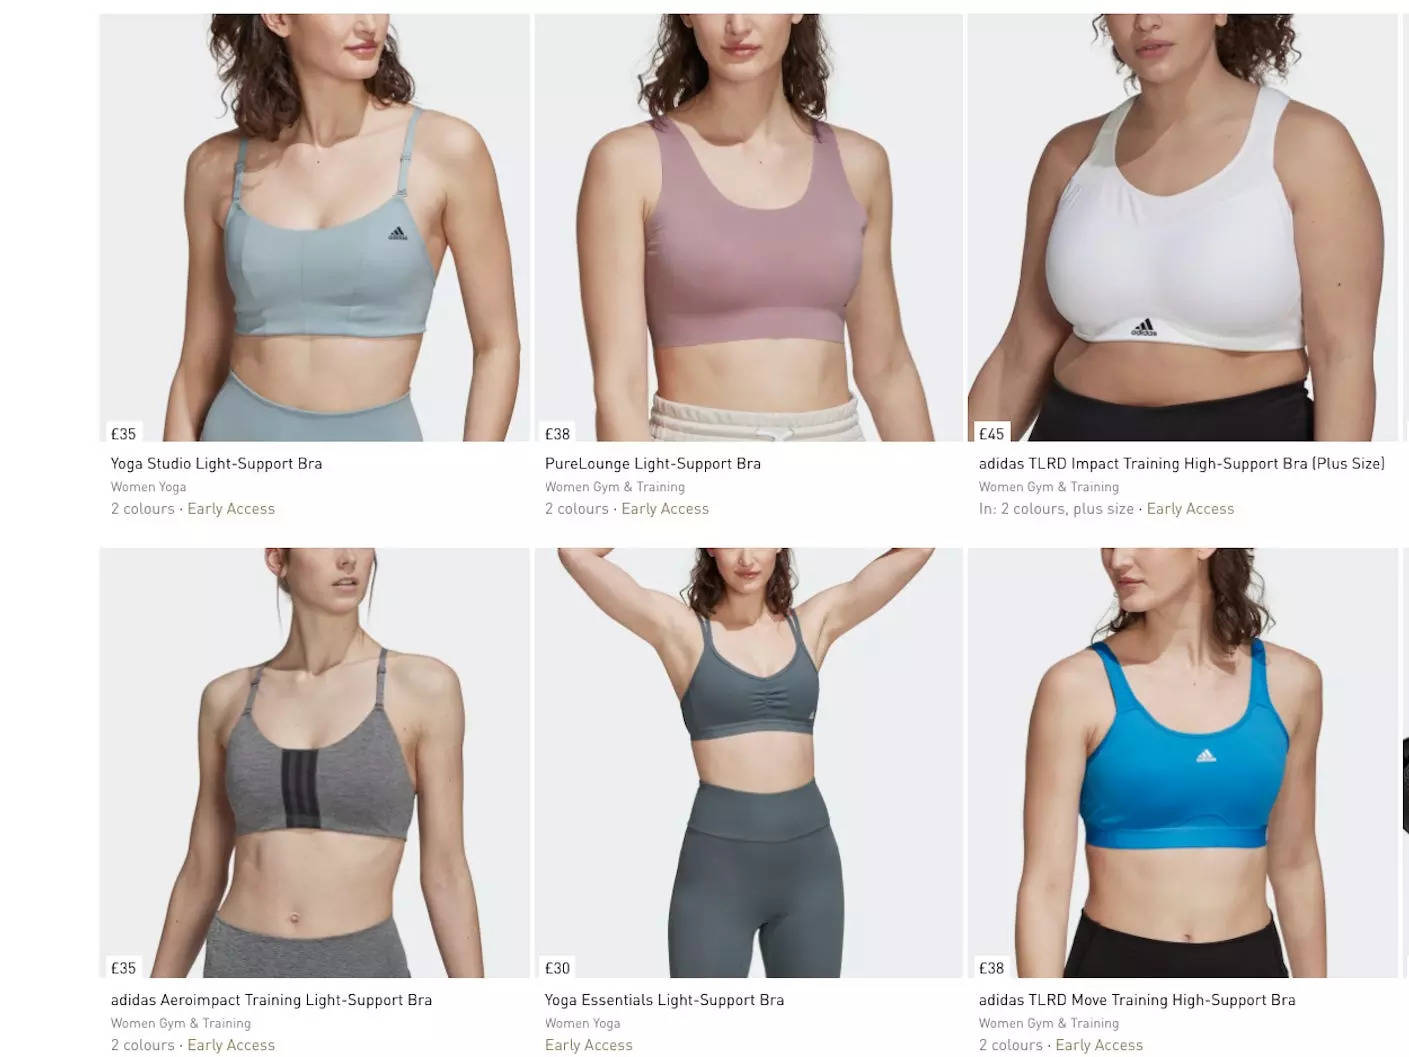 https://www.businessinsider.in/photo/89505437/adidas-bare-breast-campaign-to-promote-its-sports-bras-sparks-heated-debate-online.jpg?imgsize=60594